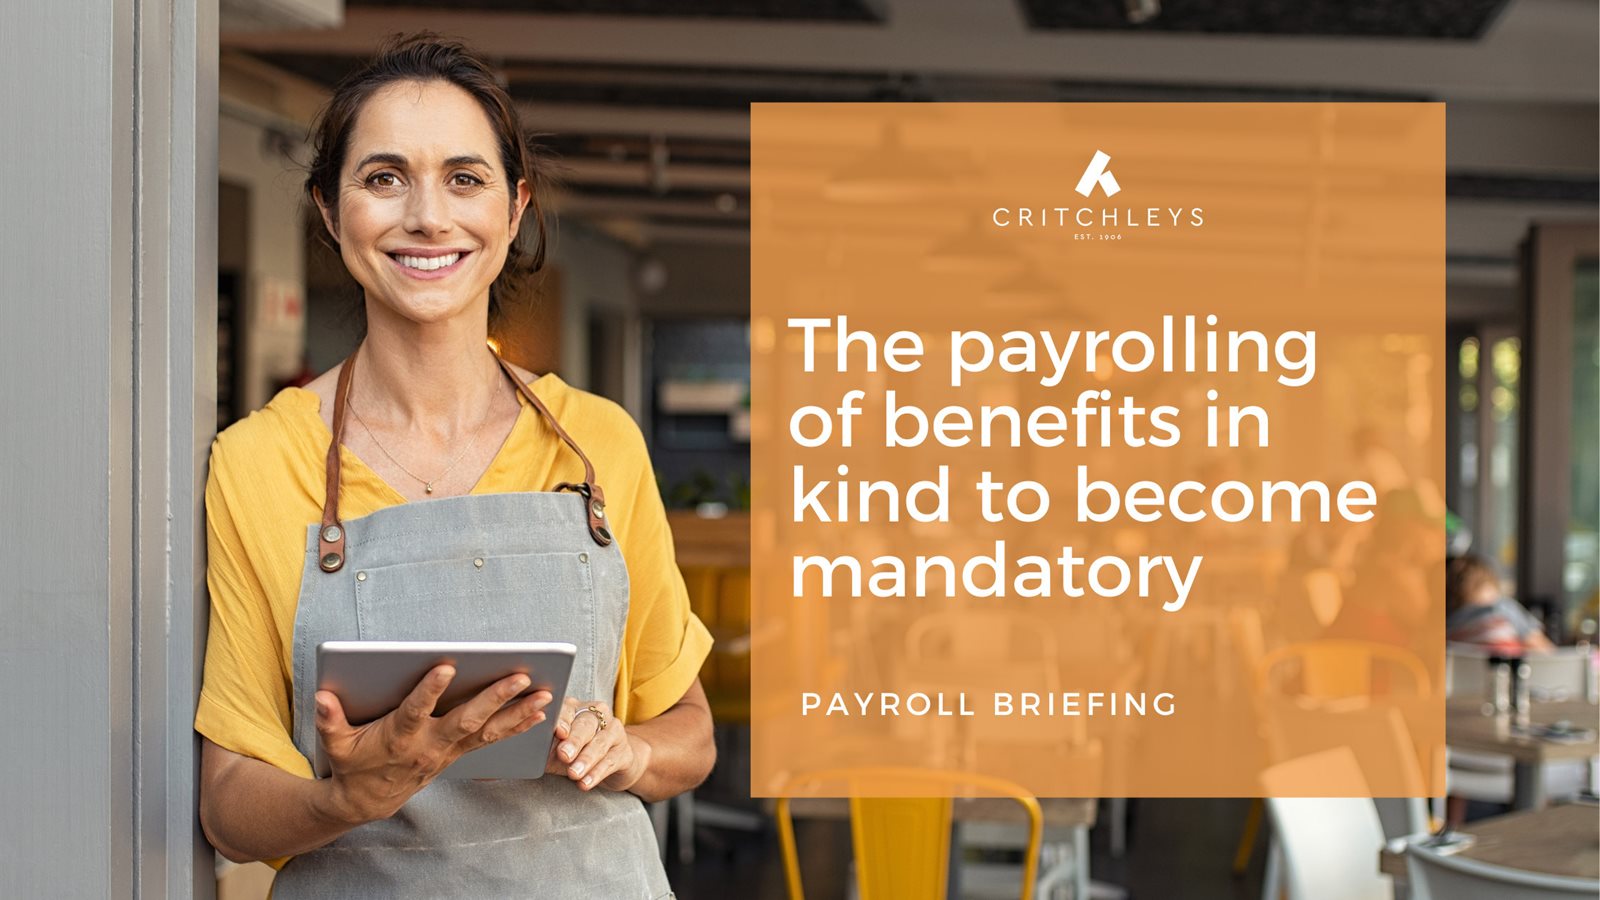 The payrolling of benefits in kind to become mandatory